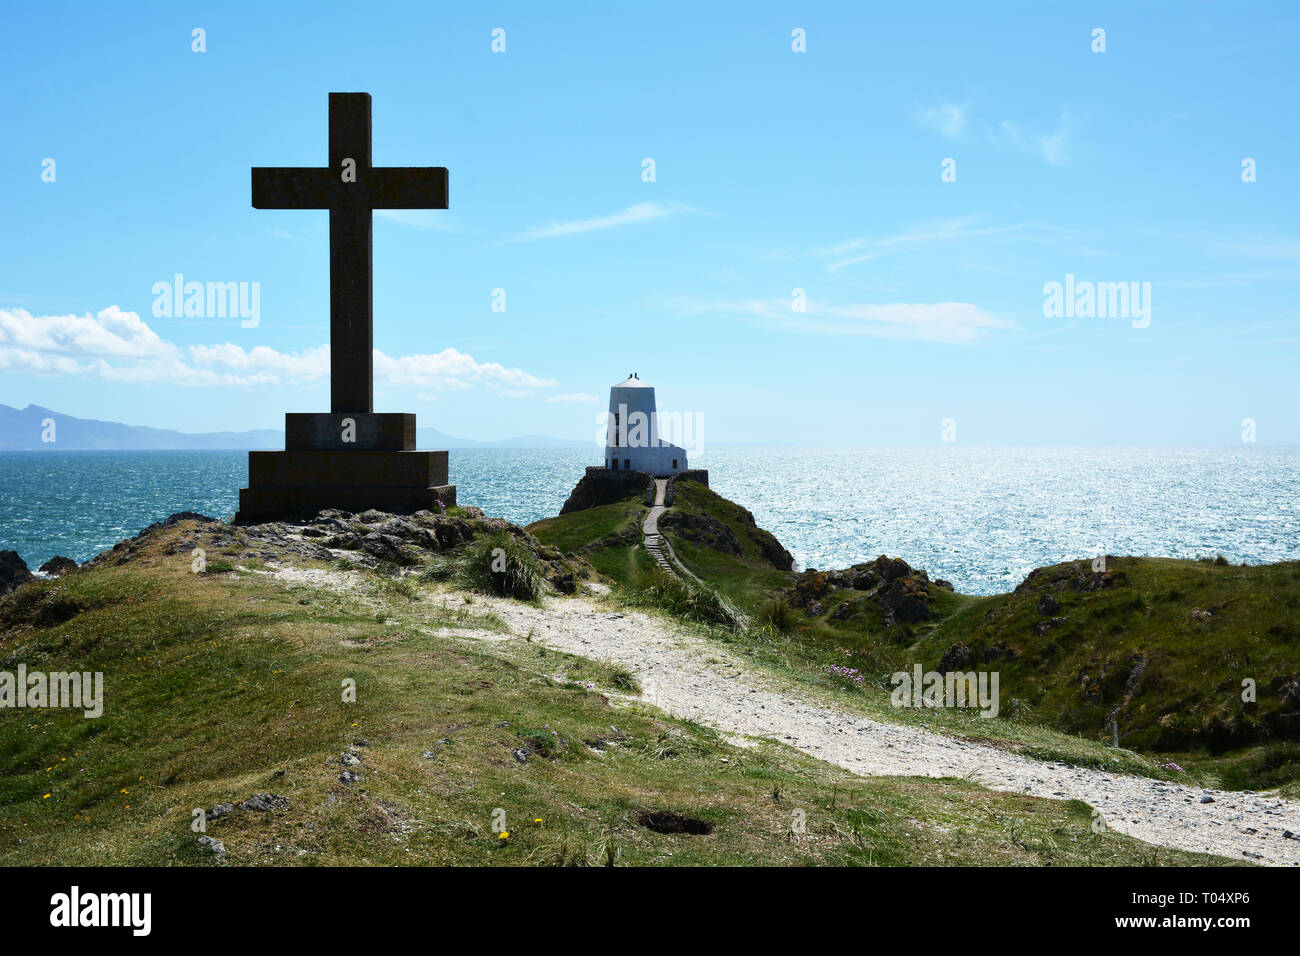 Saint Dwynwen's cross and Twr Mawr lighthouse on Llanddwyn Island. This beautiful island is situated of the coast of Anglesey in North Wales Stock Photo